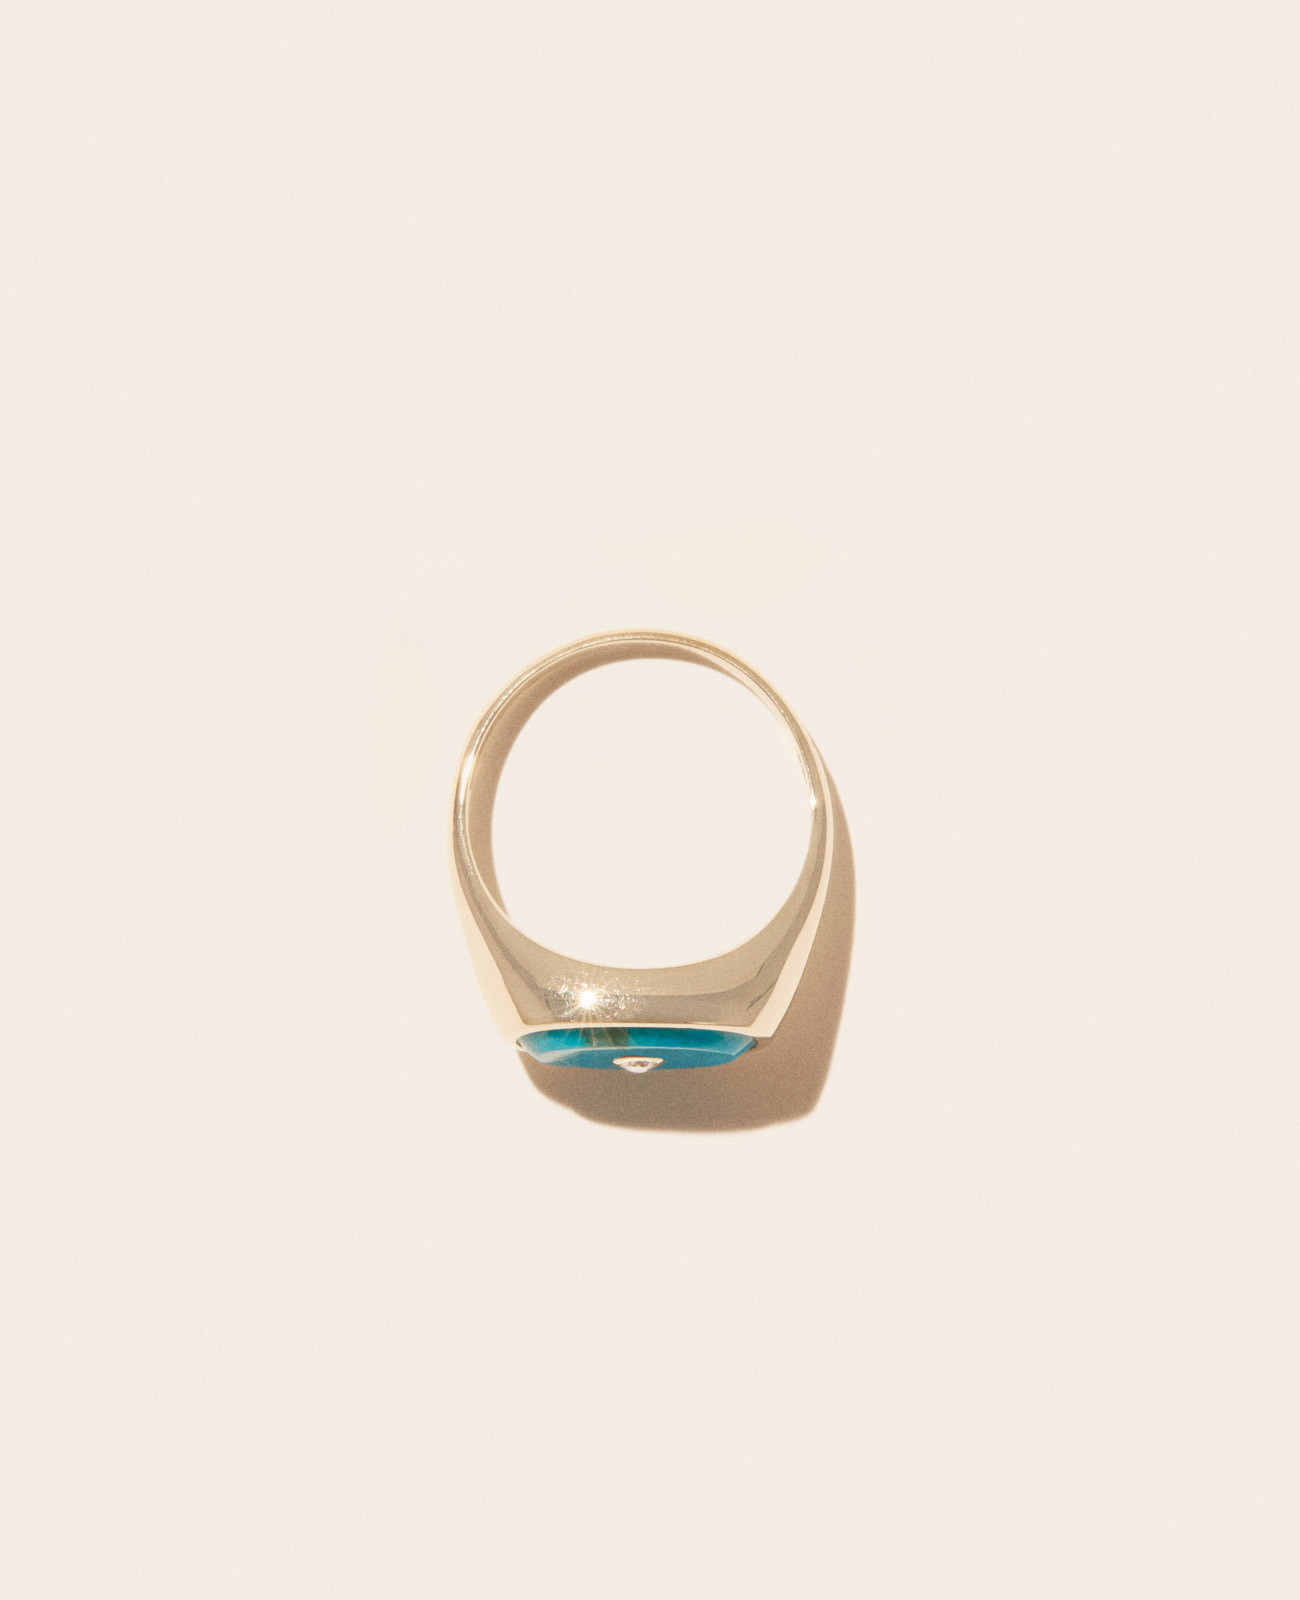 Bague Pascale Monvoisin Orso turquoise